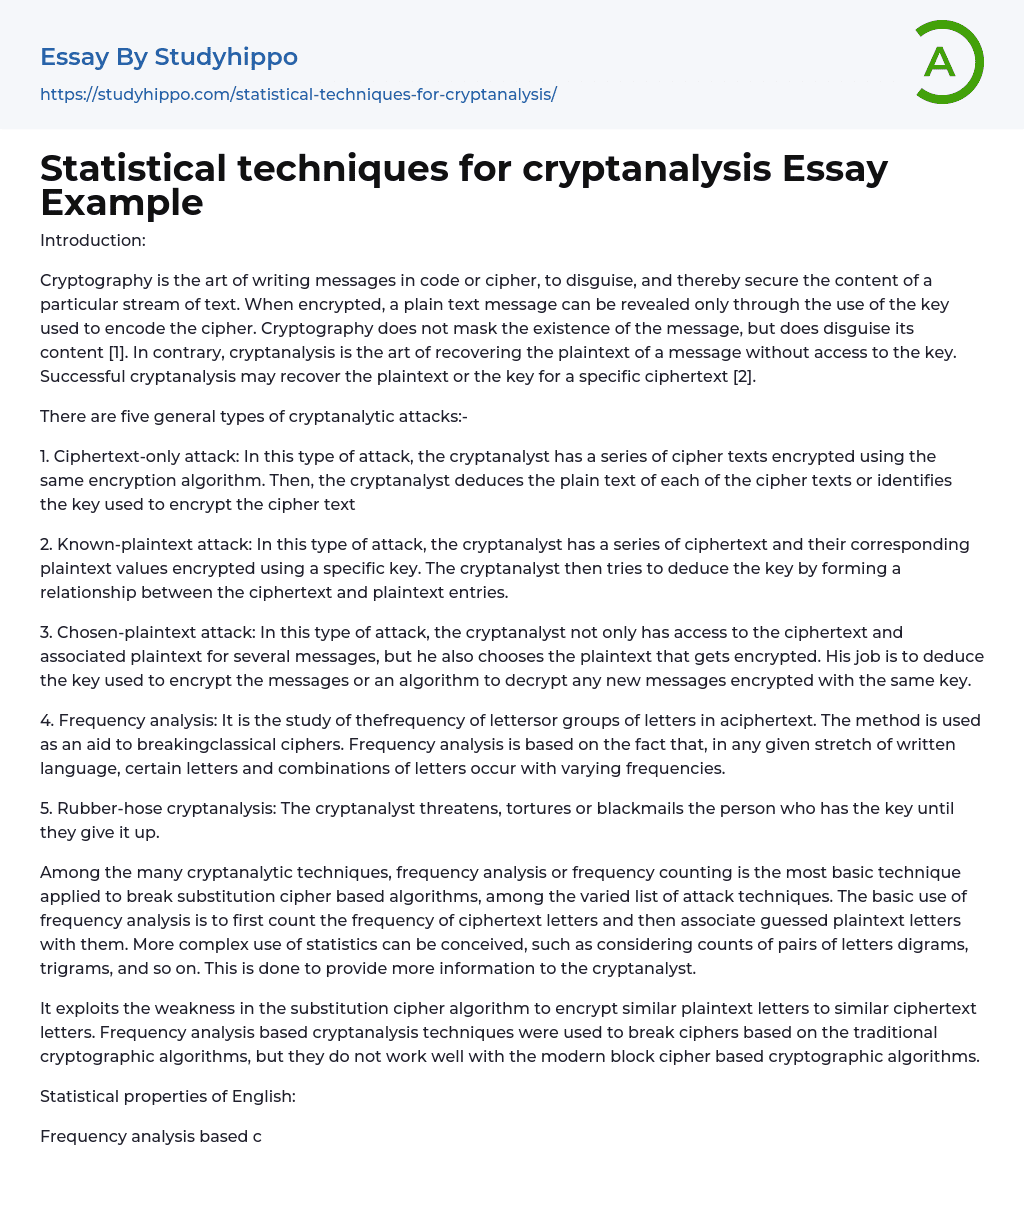 Statistical techniques for cryptanalysis Essay Example